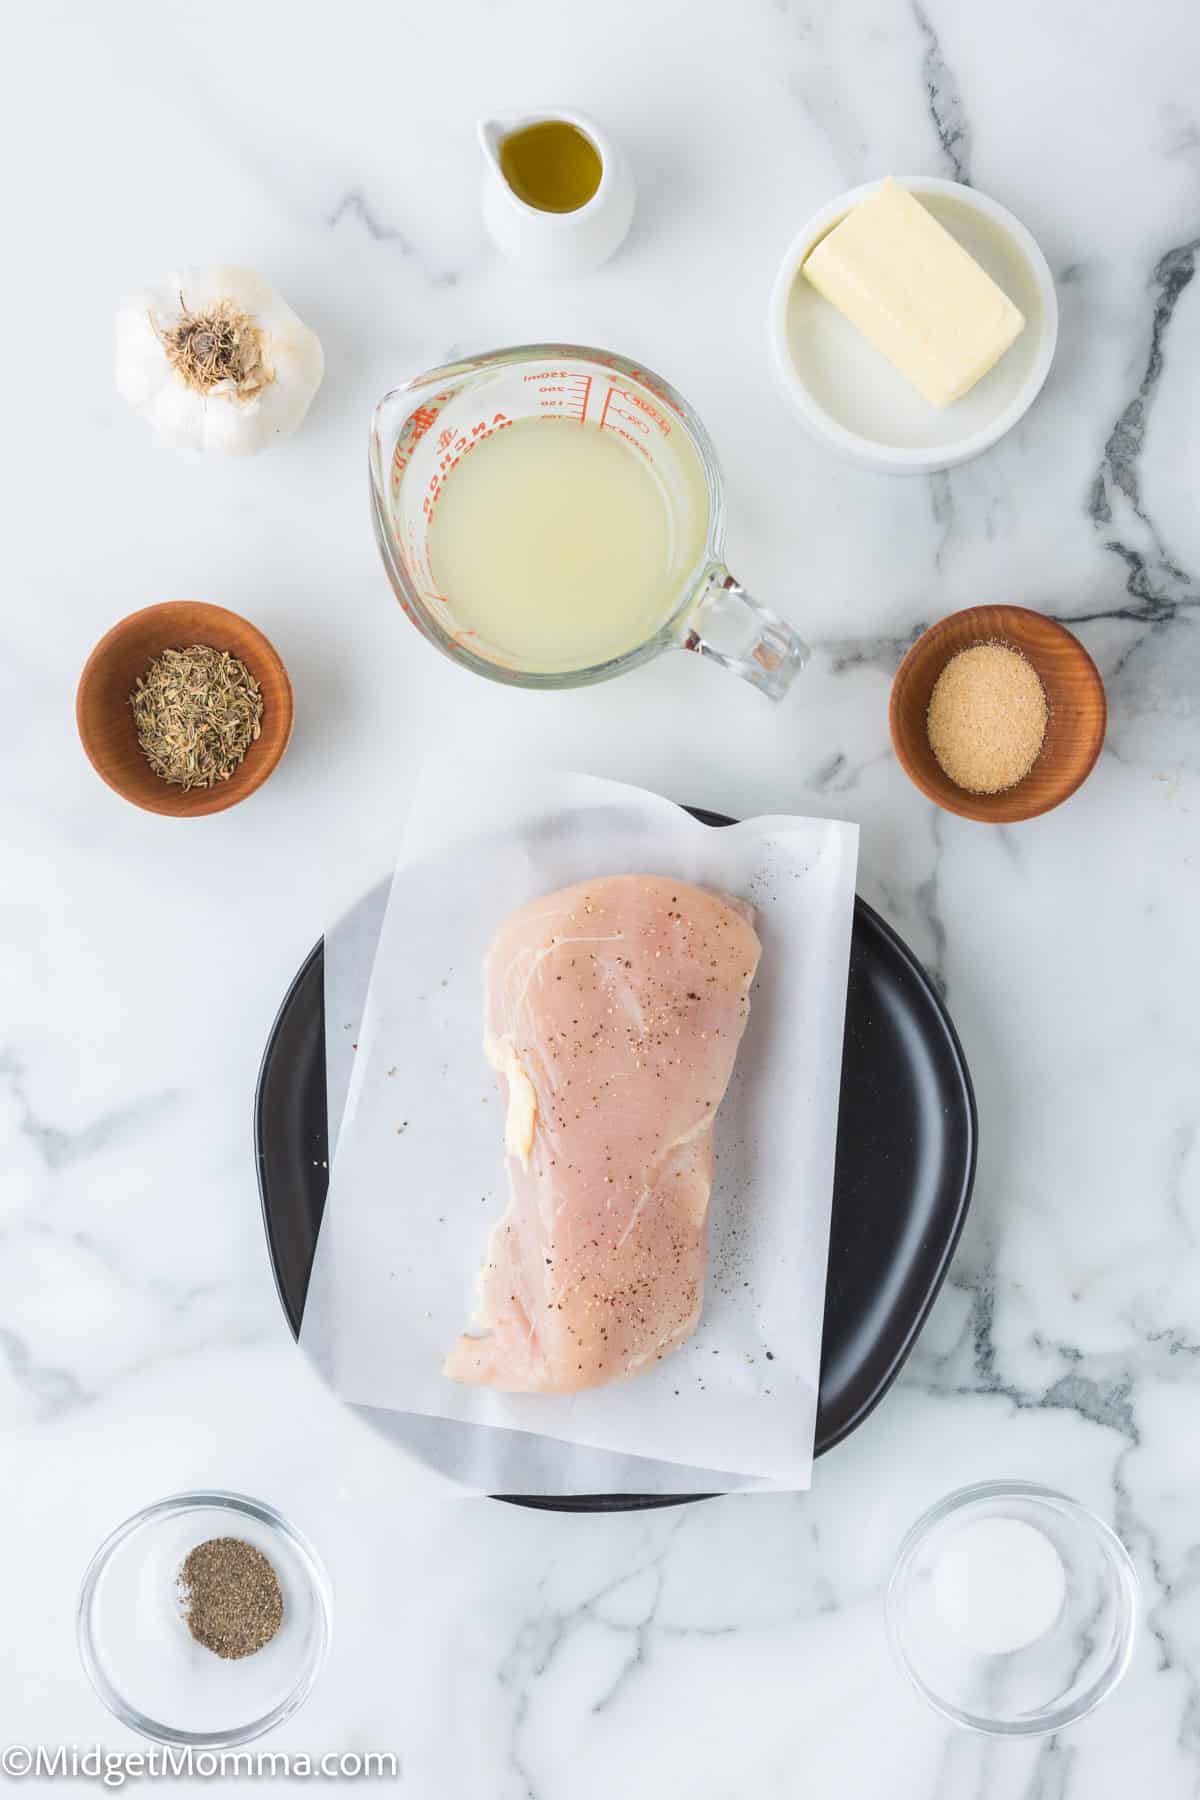 Garlic Butter Chicken Ingredients - A raw seasoned chicken breast on a plate surrounded by ingredients including garlic, olive oil, butter, lemon juice, spices, and seasonings on a marble surface.